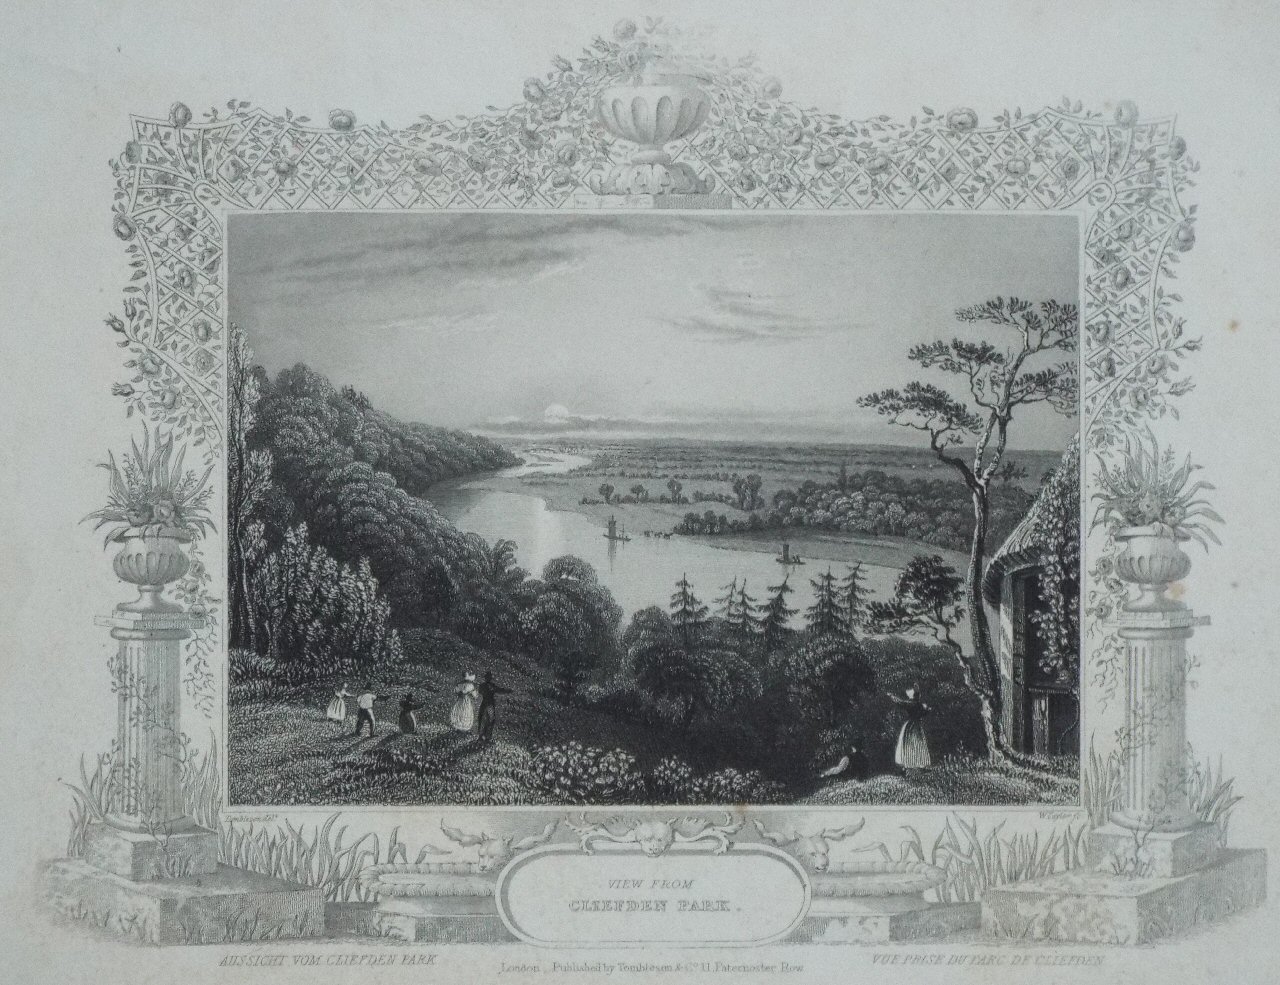 Print - View from Cliefden Park - Taylor